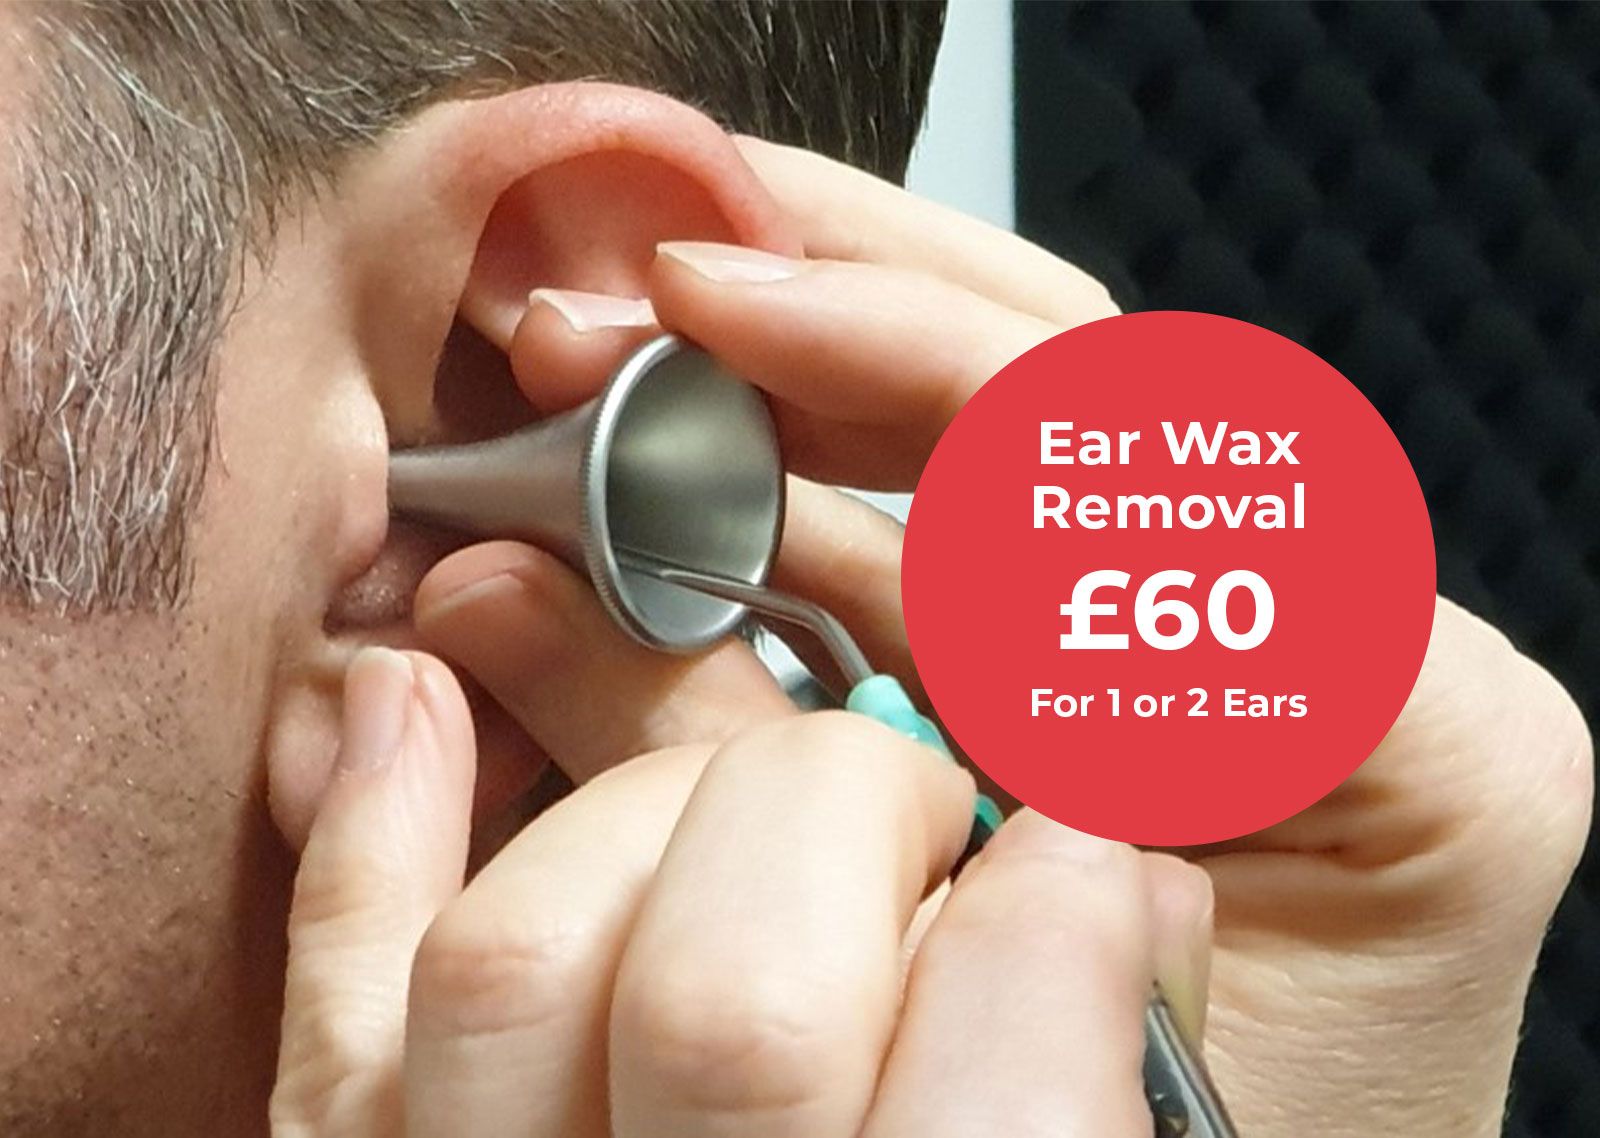 £60 for 1 or 2 Ears - Book Online Today or Call 0330 133 3291